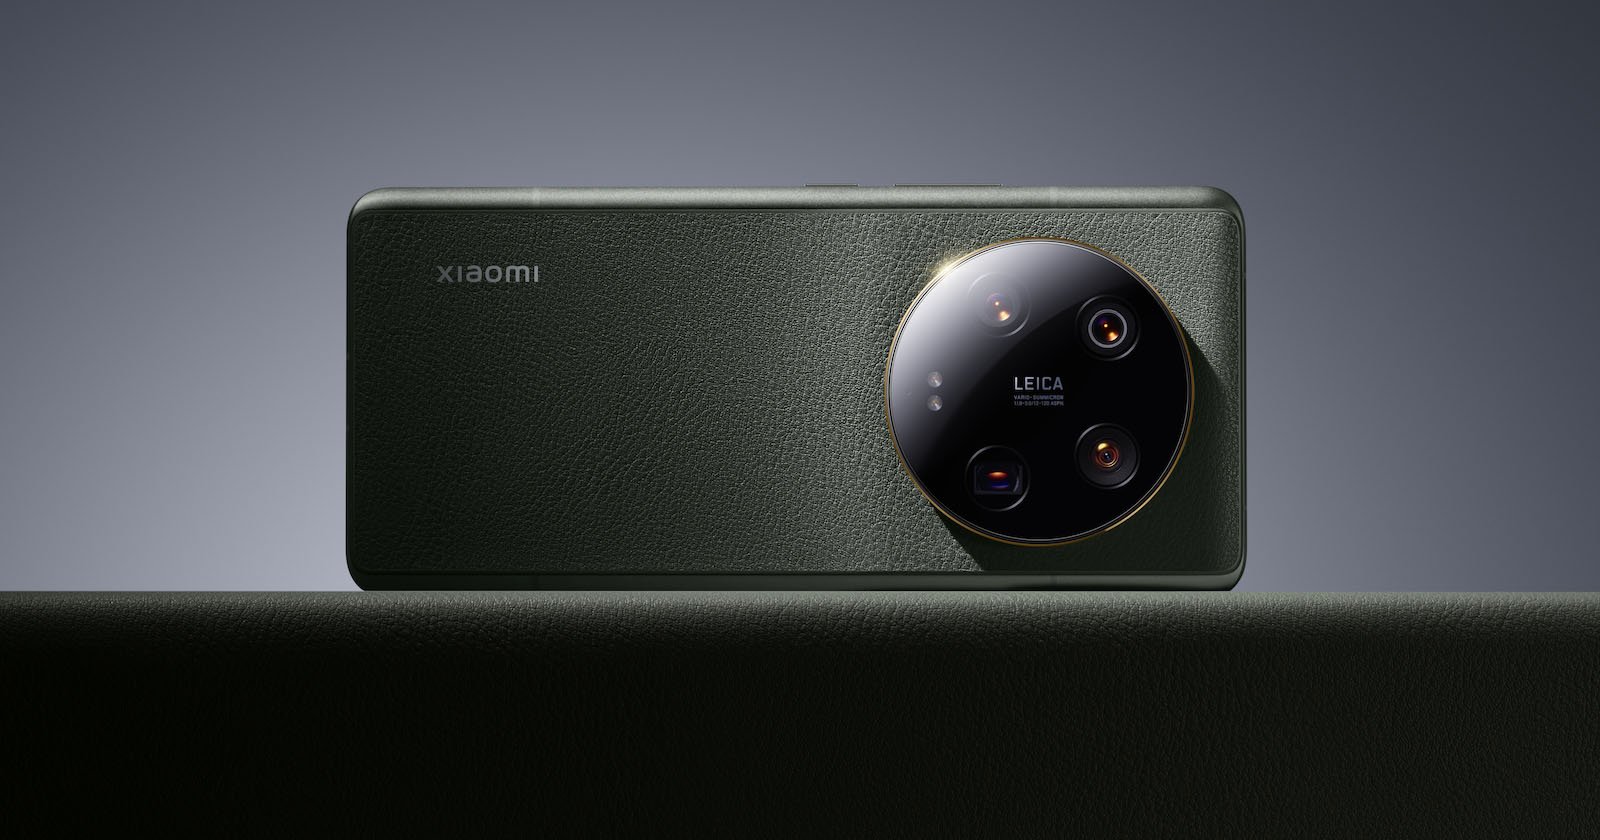 Xiaomi 13 Lite with Dual Selfie Cameras Introduced Globally